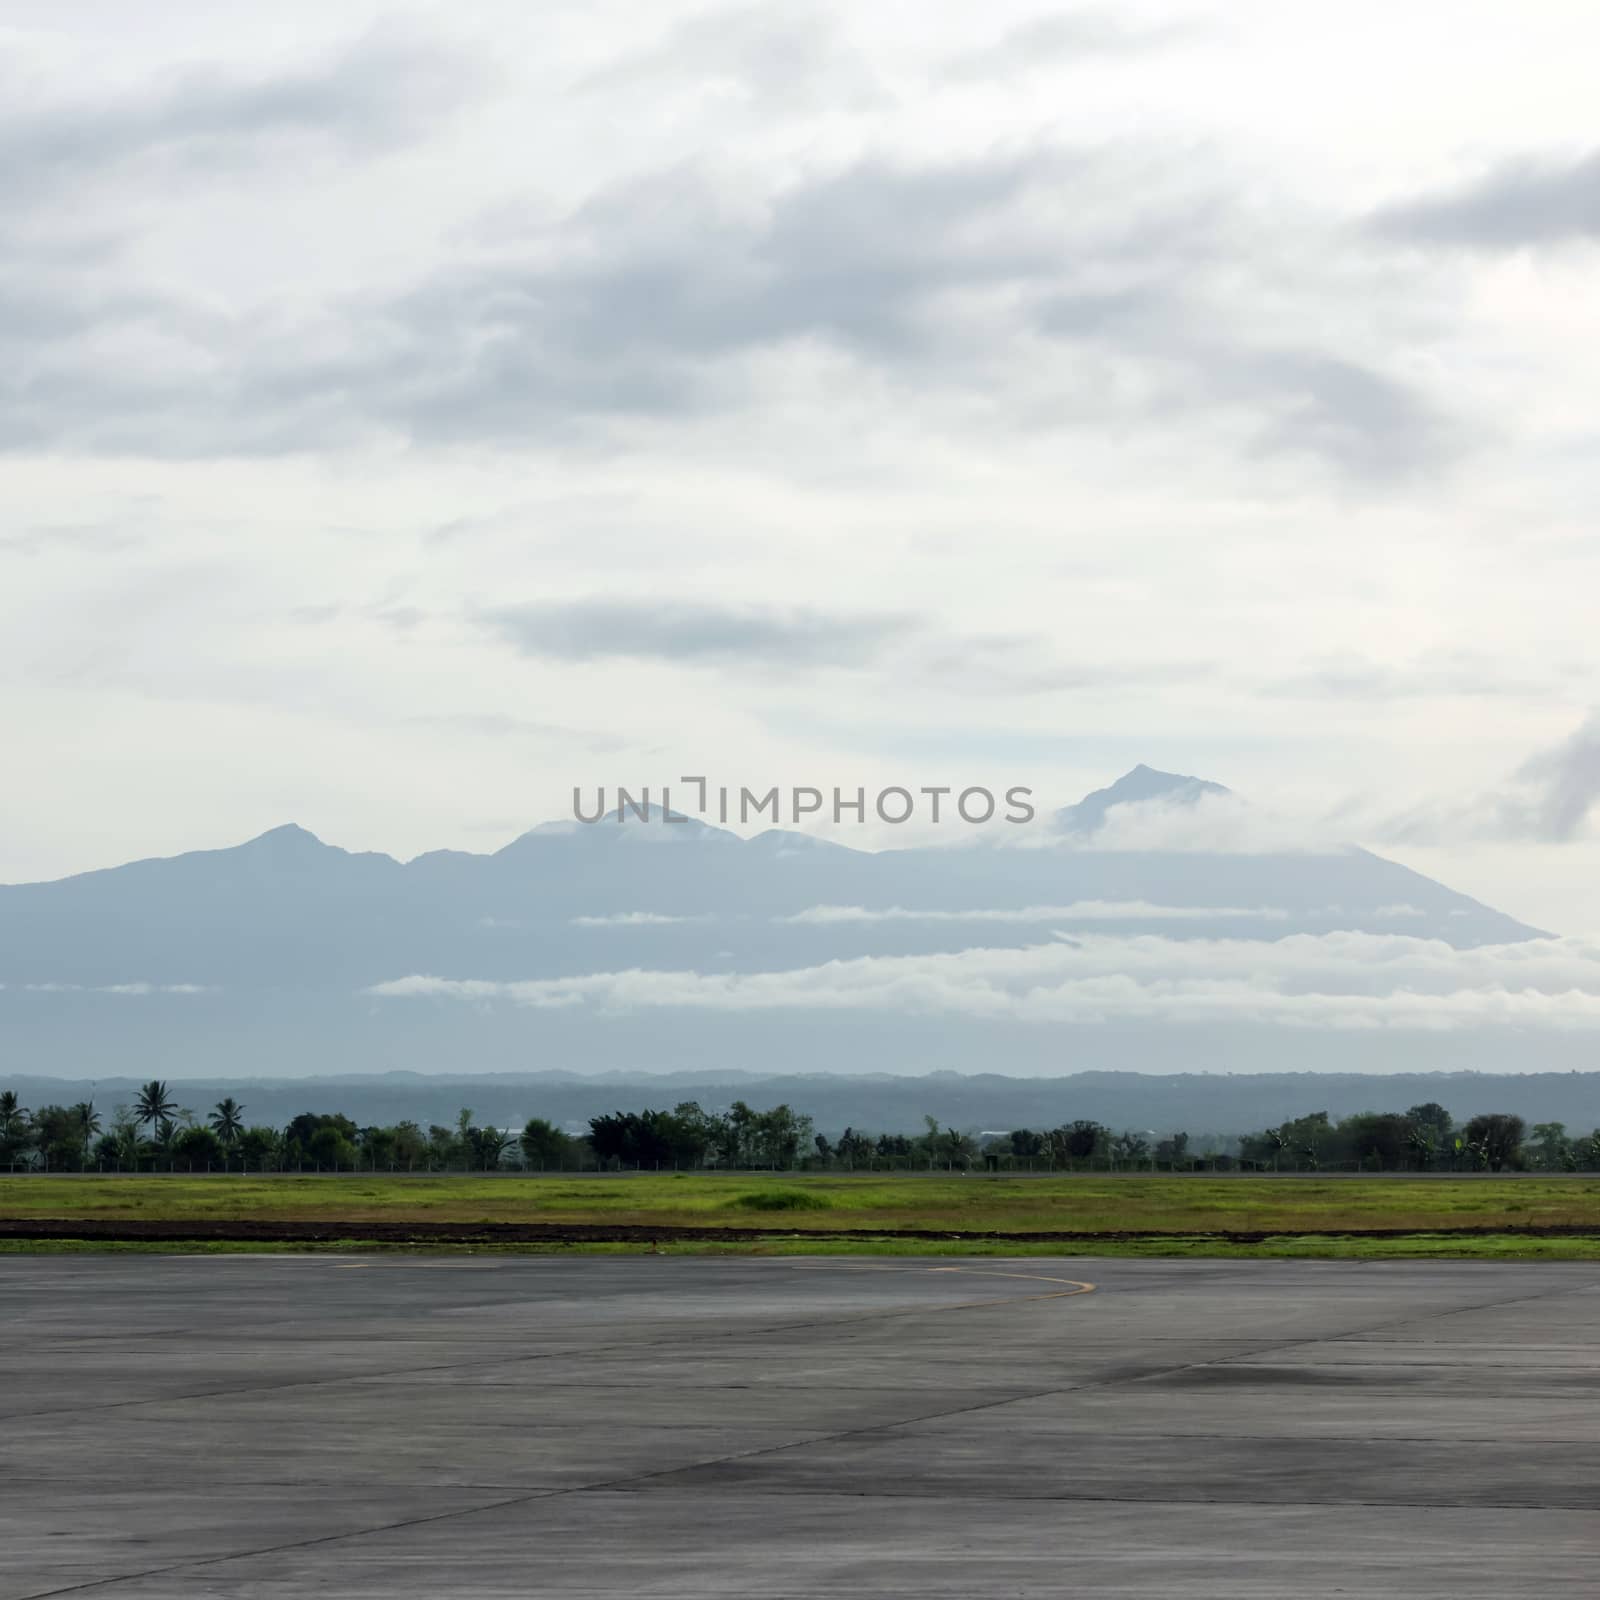 Runway with mountain by liewluck